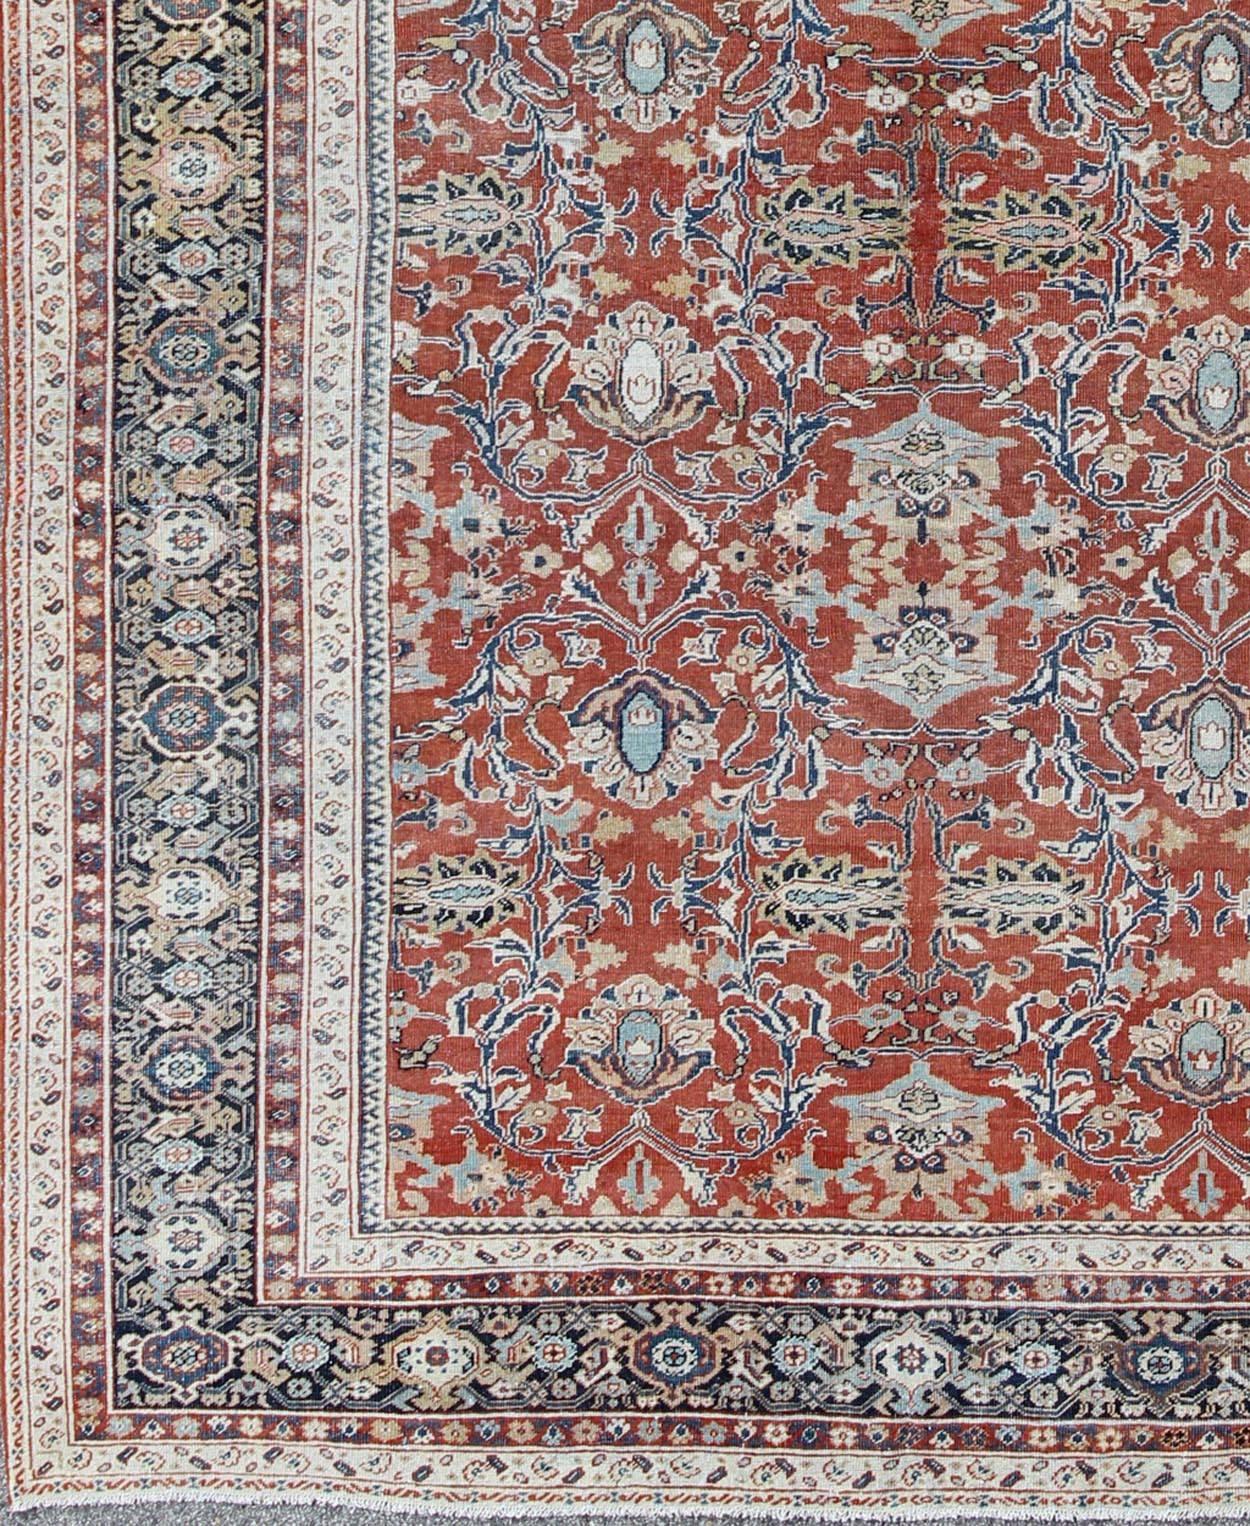                                           Antique Sultanabad Rug with Large Flower Design in Soft Red Field.

All Over Design Antique Sultanabad Rug. Keivan Woven Arts / rug /17-0606, country of origin / type: Iran / Sultanabad , circa